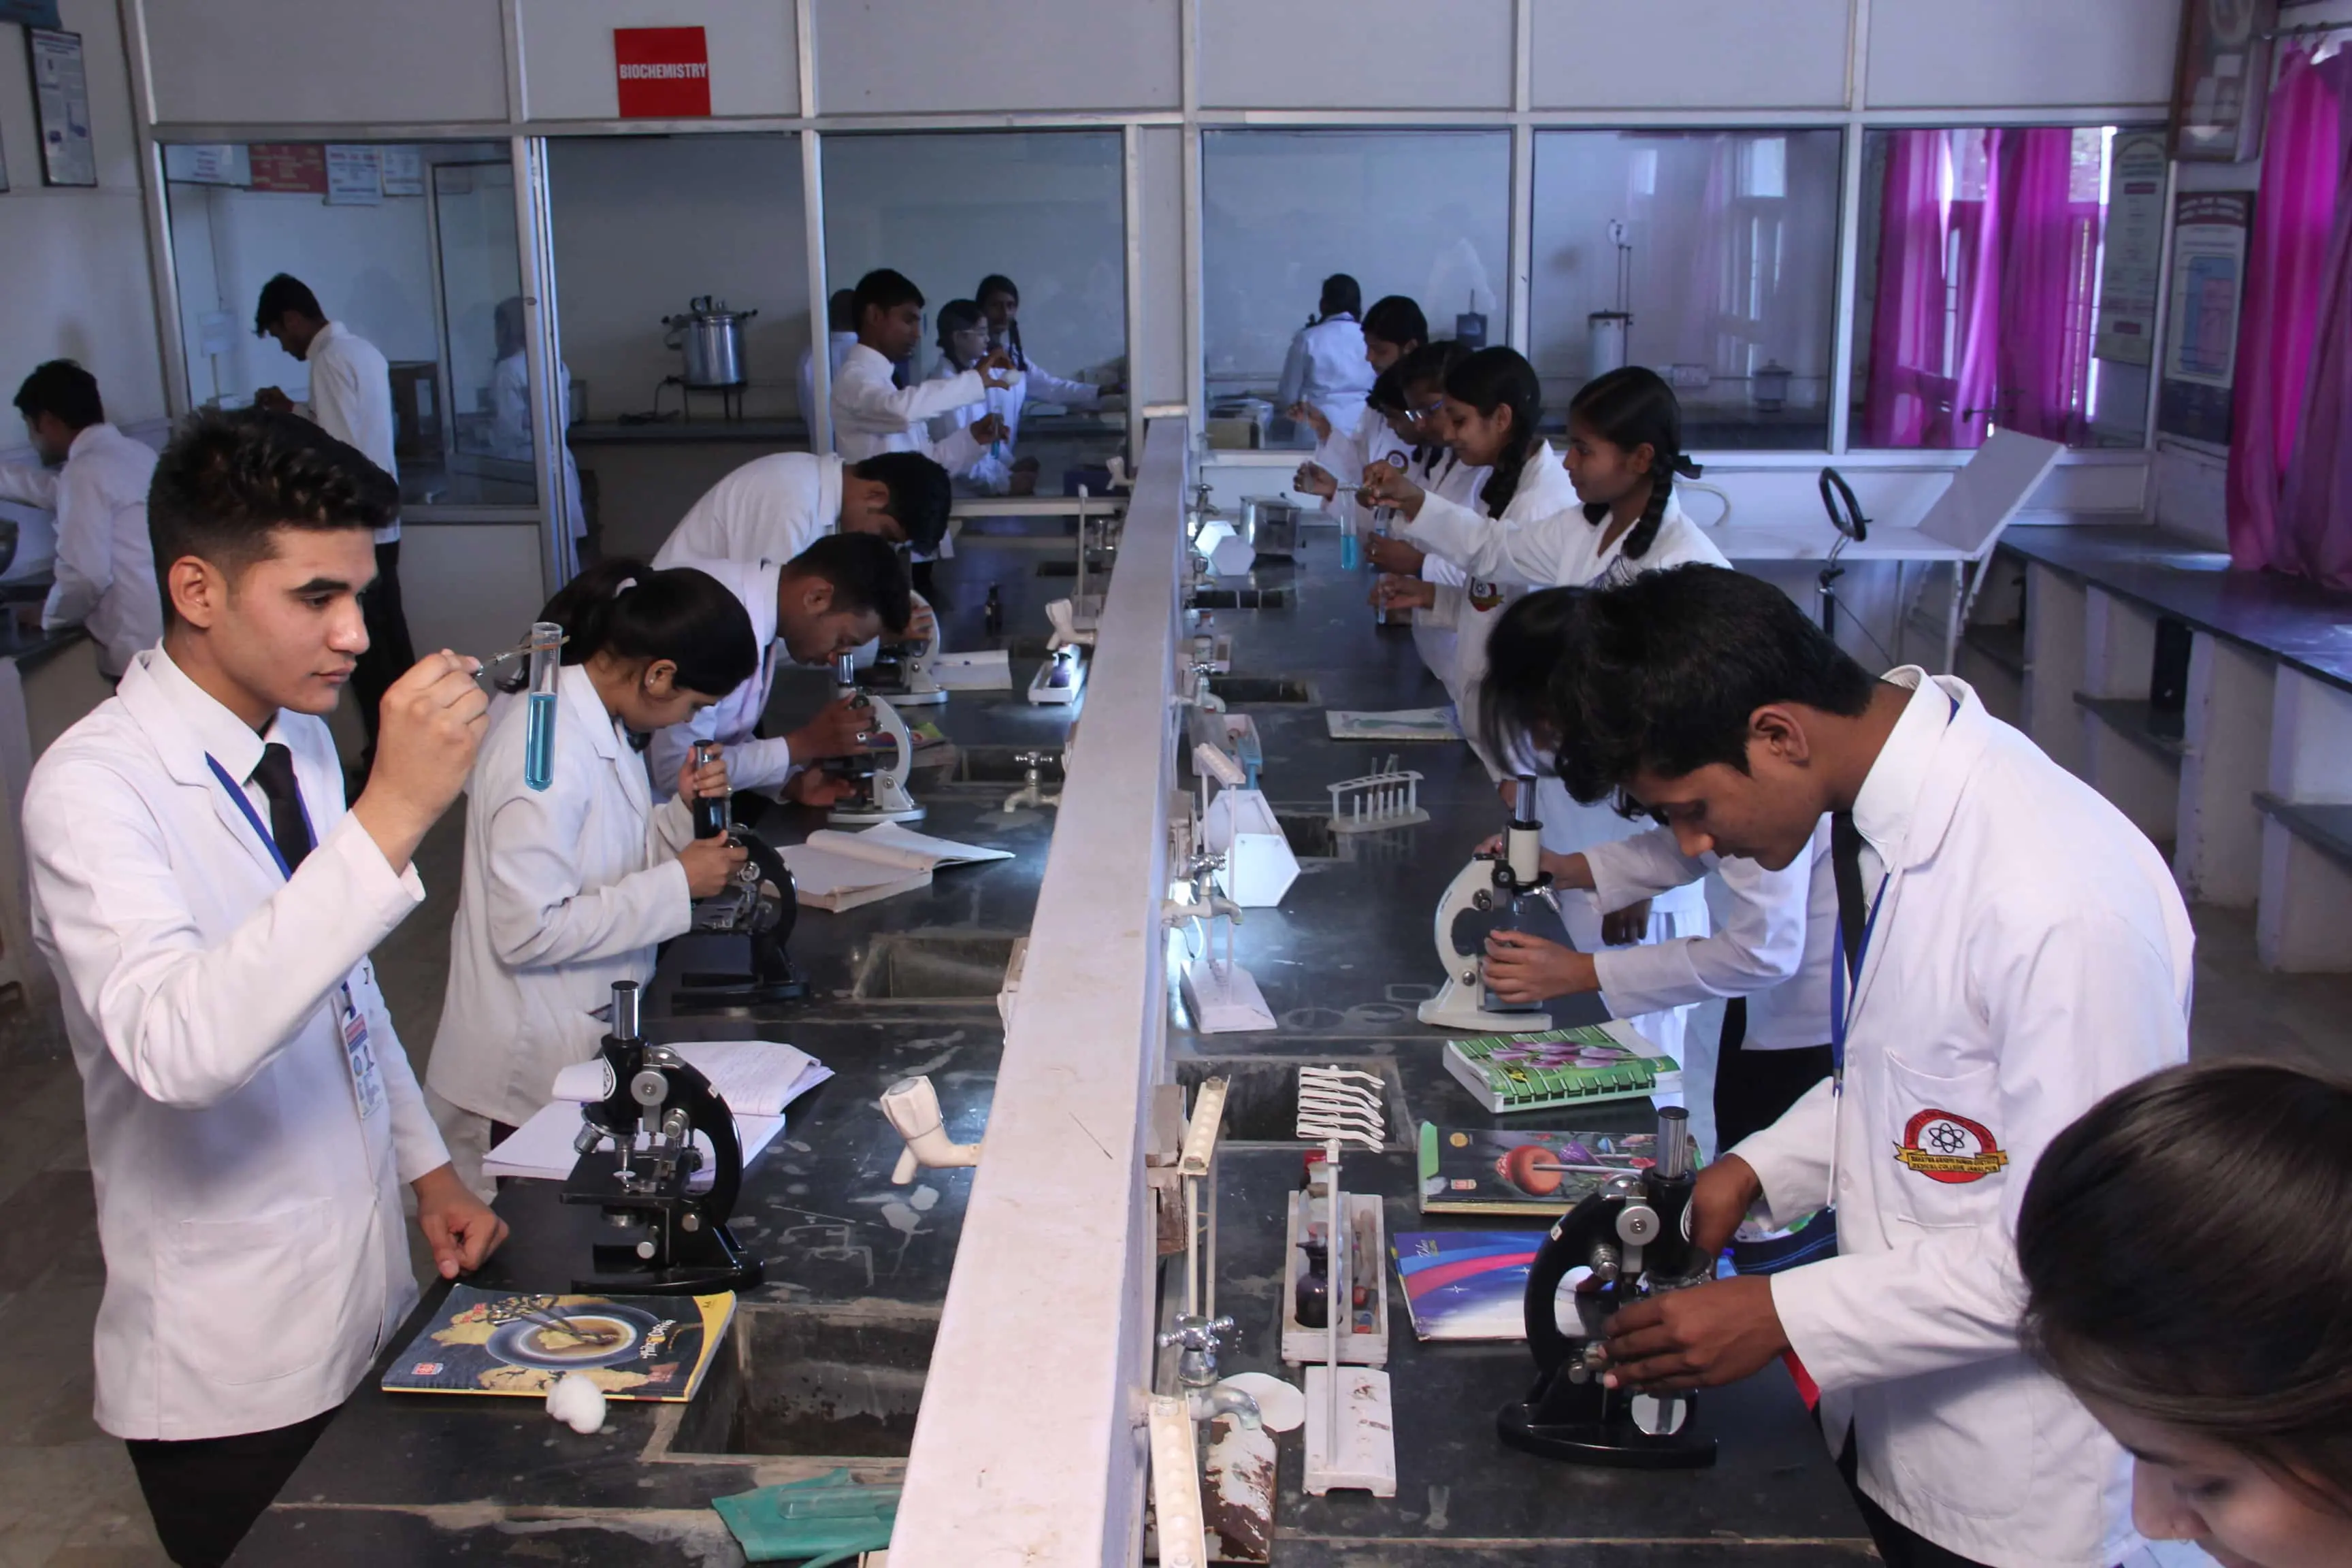 Students experimenting in a lab.